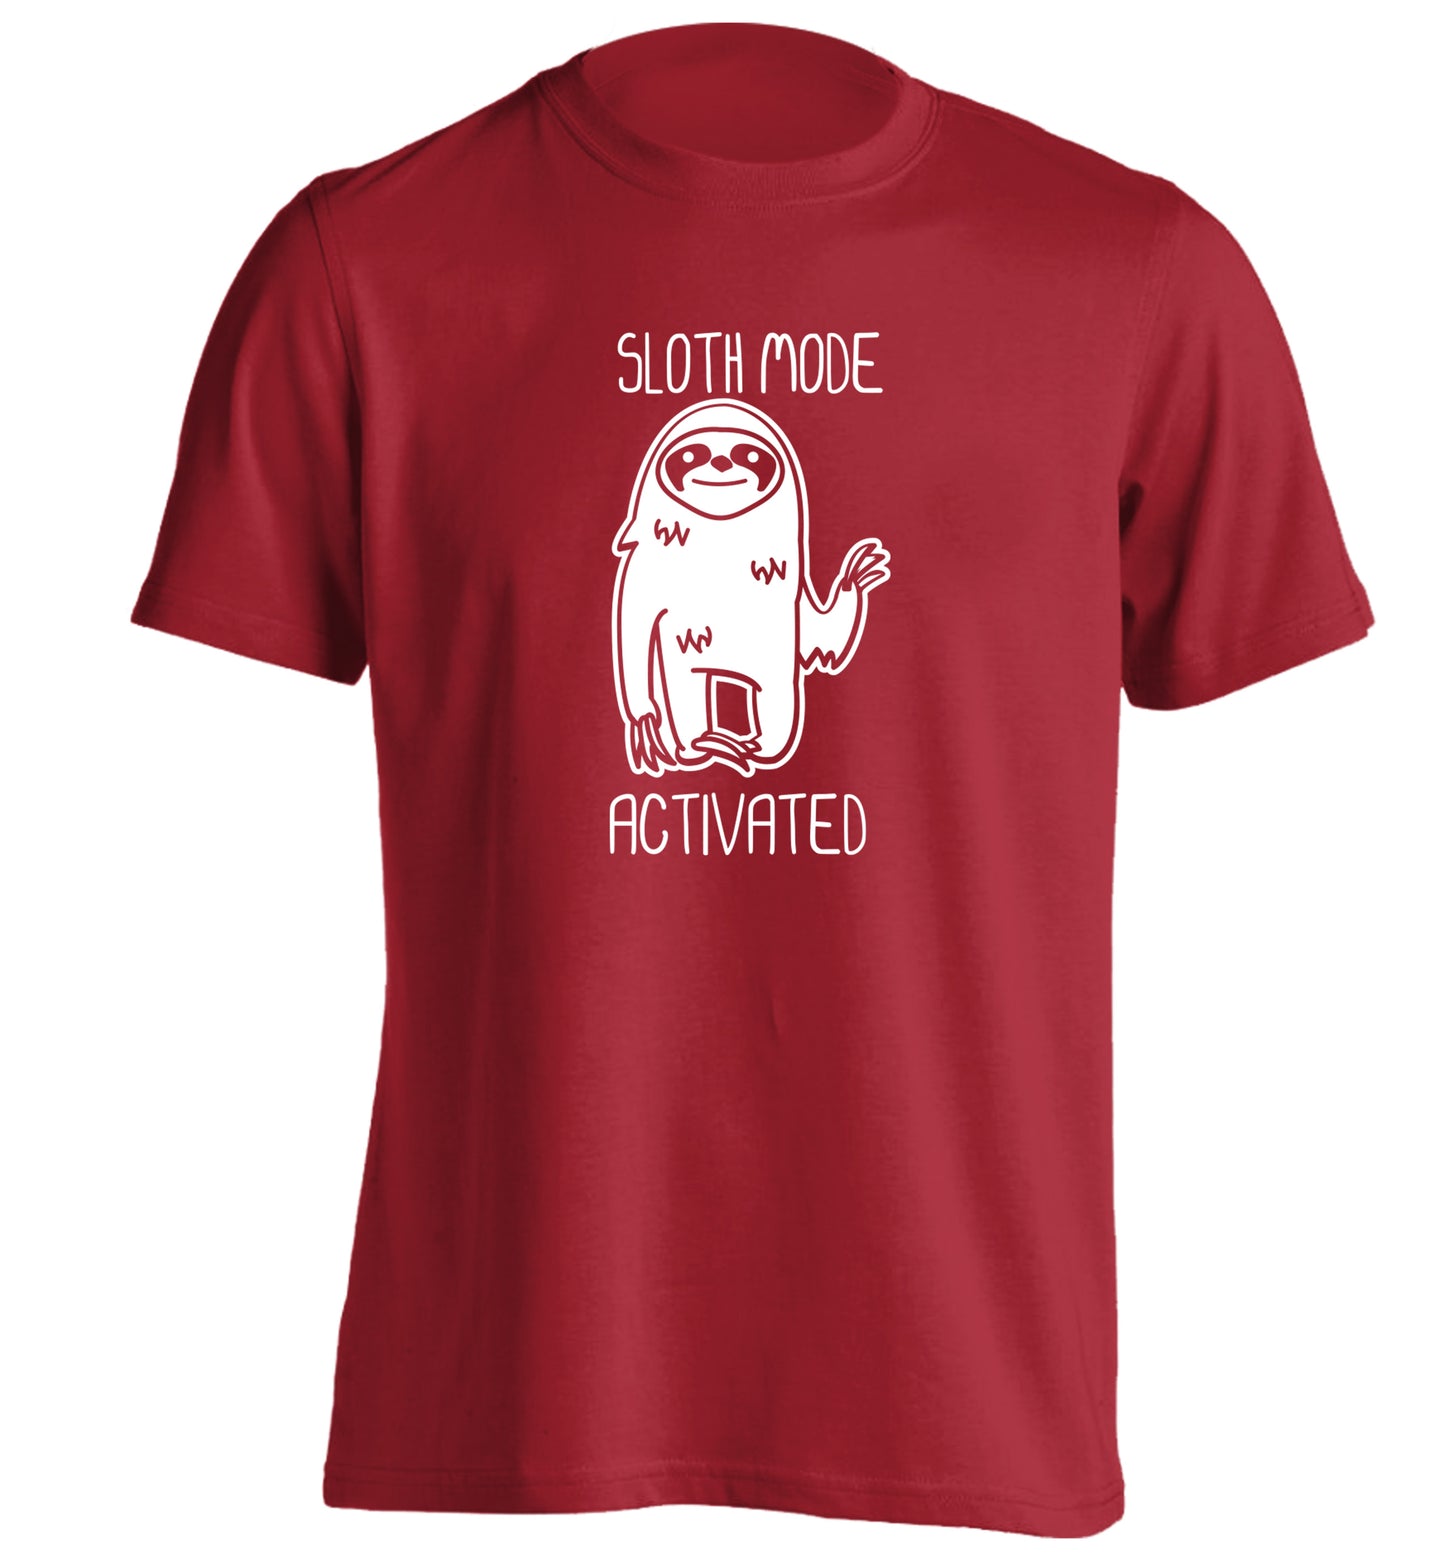 Sloth mode acitvated adults unisex red Tshirt 2XL